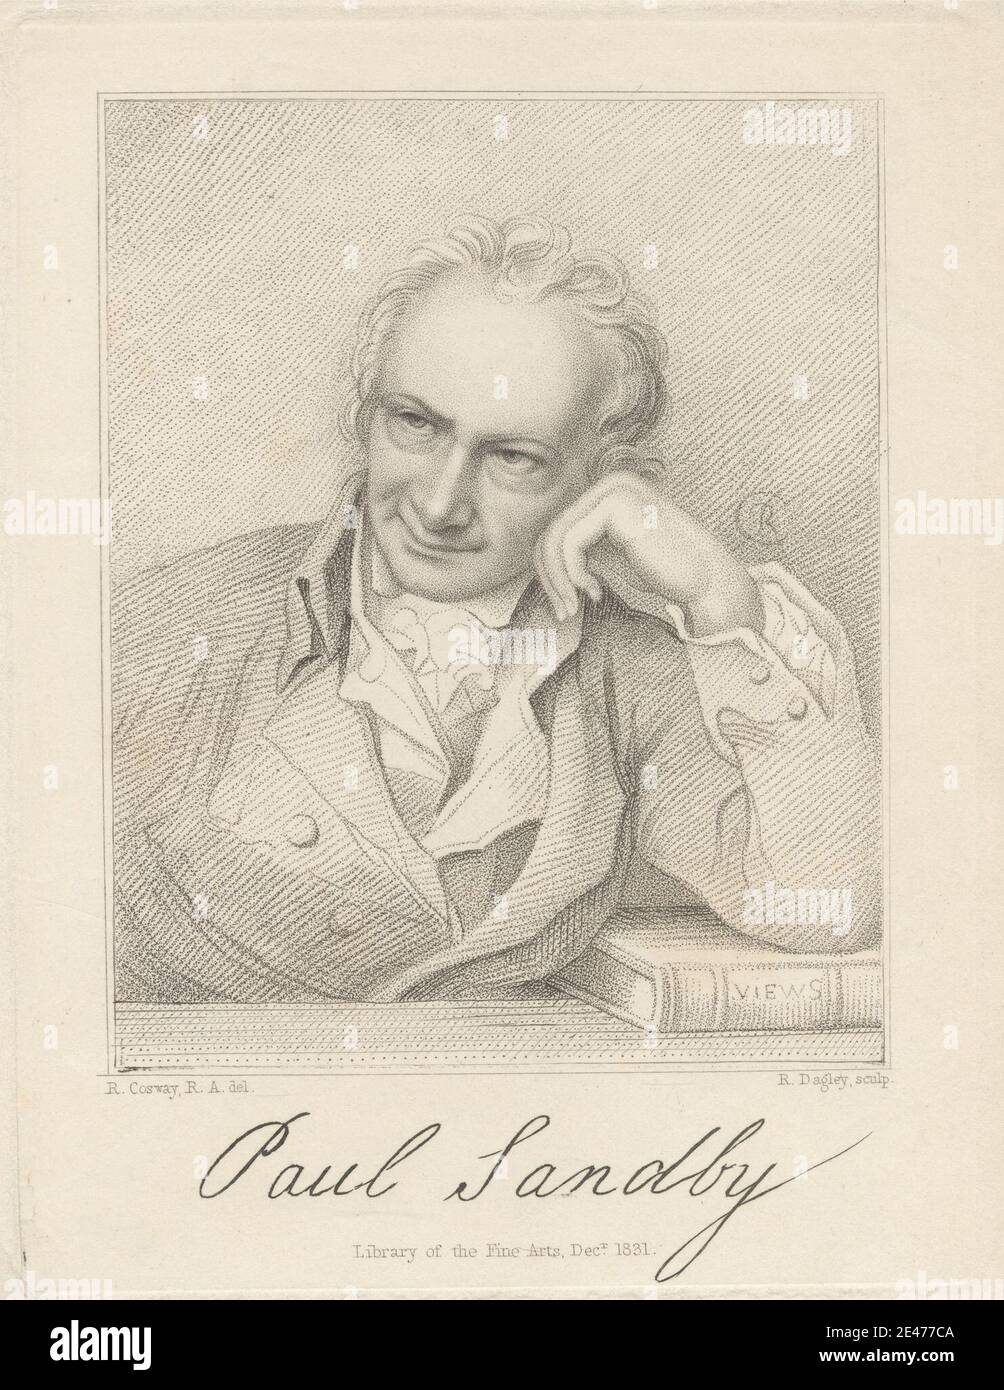 Print made by Richard Dagley, ca. 1765–1841, British, Paul Sandby, 1831. Stipple engraving and soft-ground etching on moderately thick, slightly textured, cream wove paper.   artist , book , collar , cravat , gaze , painter , portrait , posing , thoughtful. Sandby, Paul (bap. 1731, d. 1809), painter and engraver Stock Photo